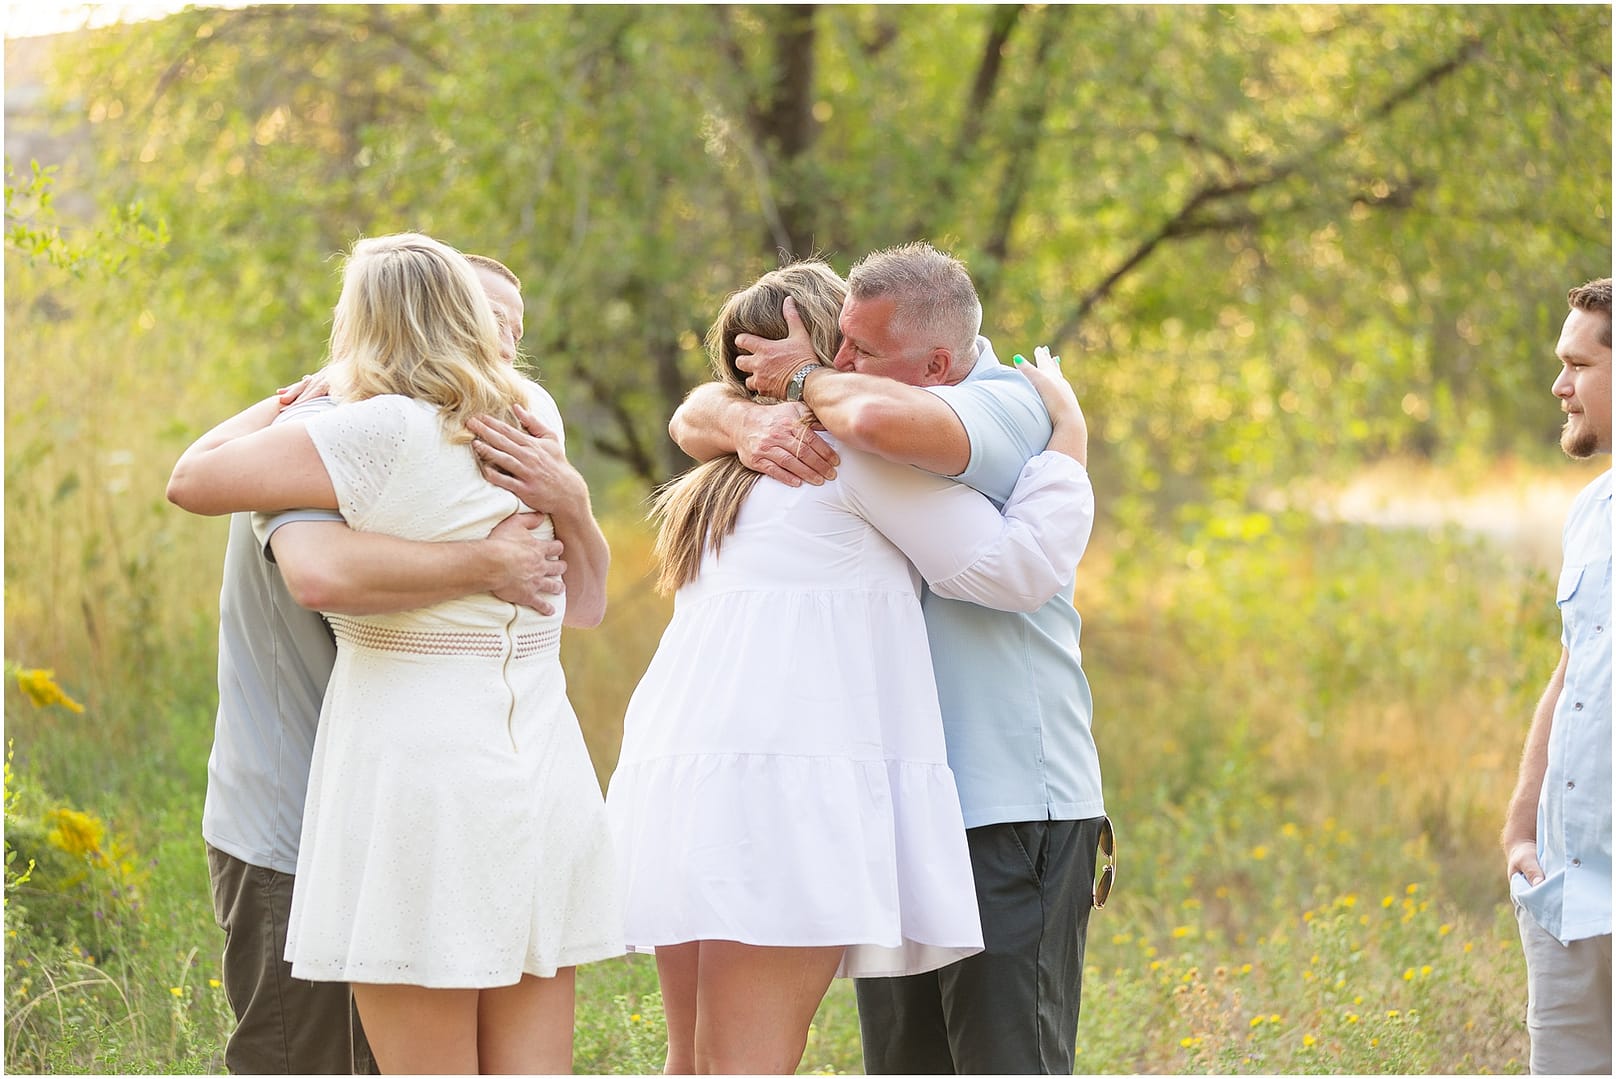 Grandparents to be hug daughter and son in law during Boise pregnancy session. Photo by Tiffany Hix Photography.